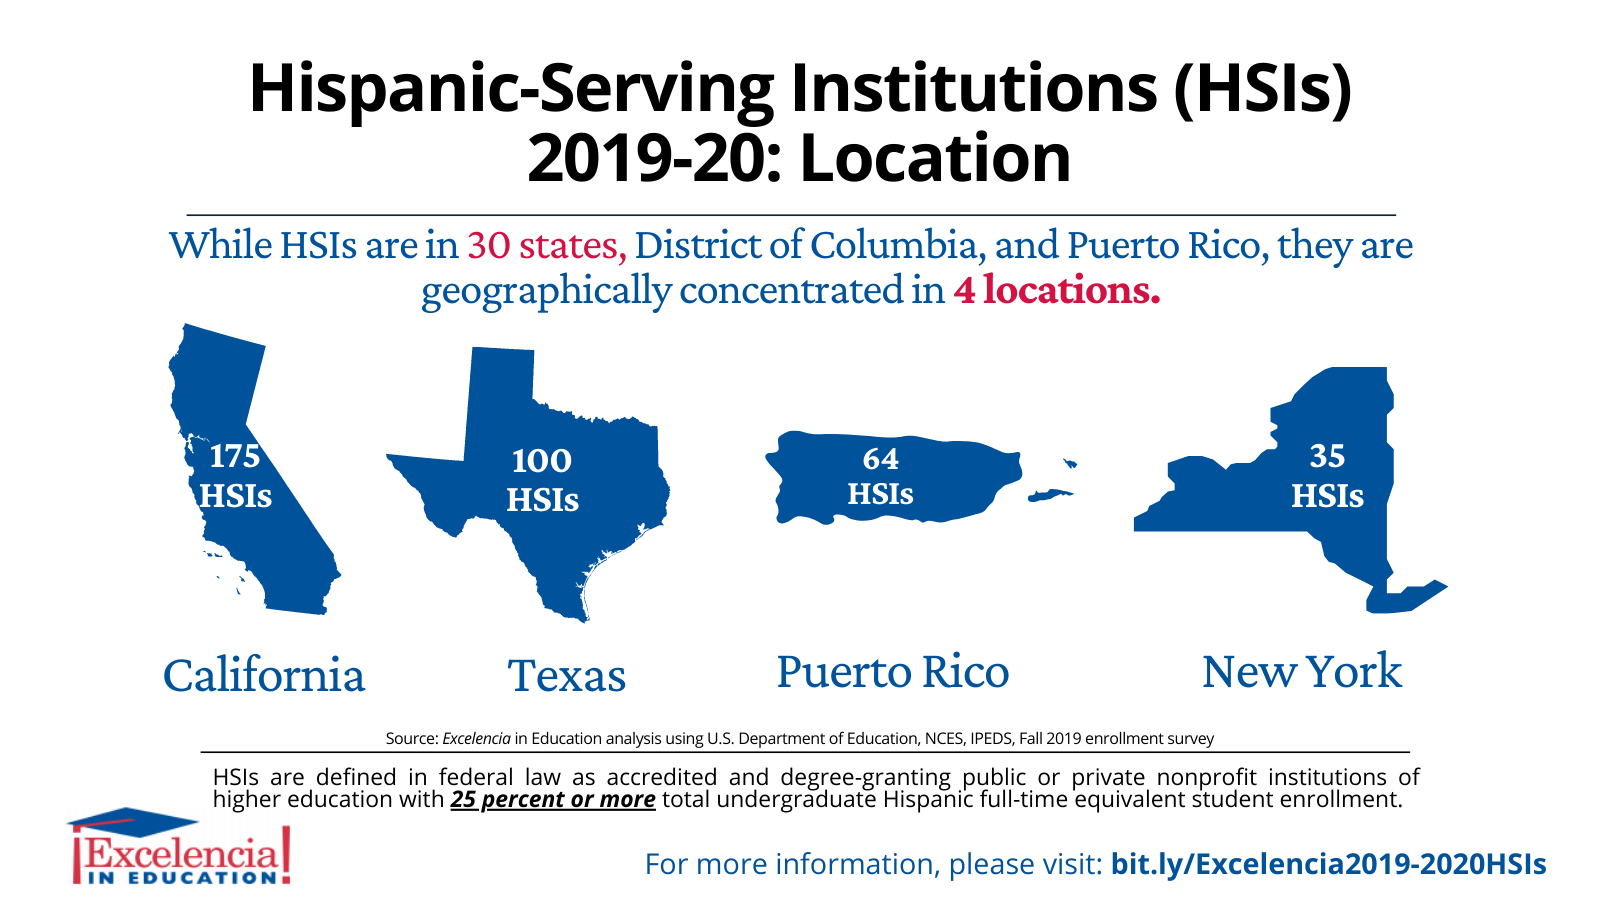 Infographic-Hispanic-Serving Institutions (HSIs) 2019-2020: Location